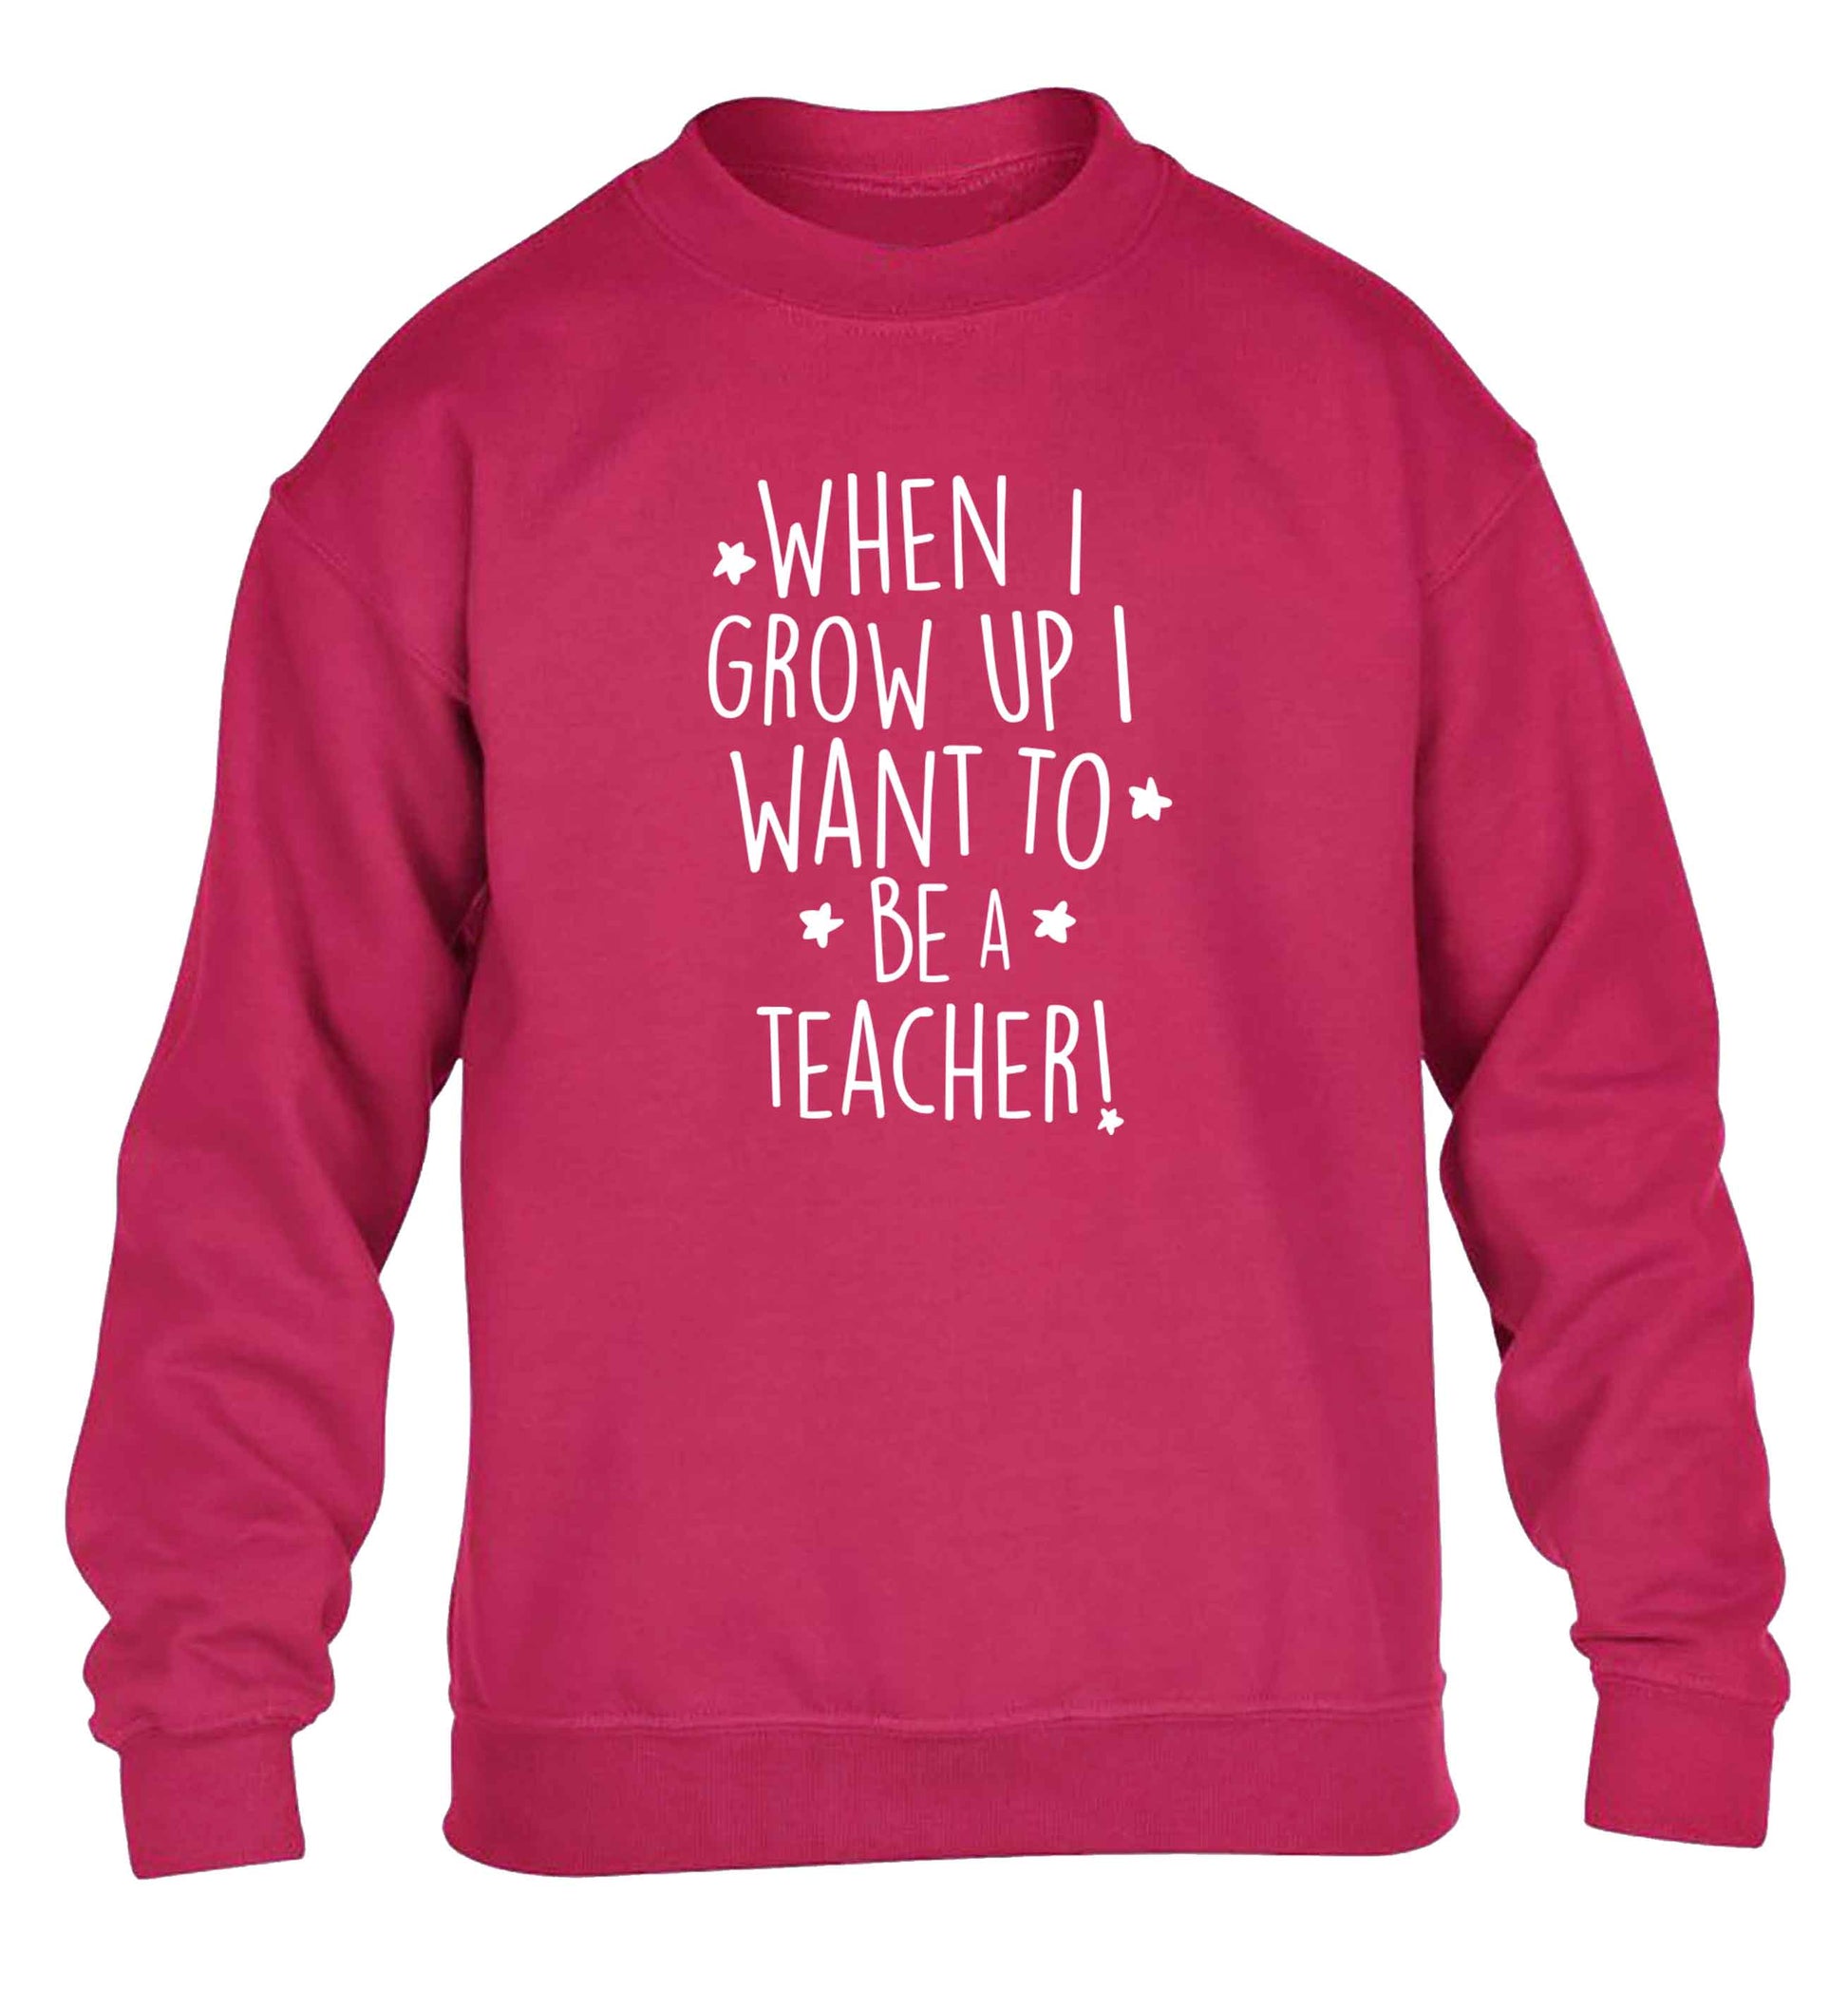 When I grow up I want to be a teacher children's pink sweater 12-13 Years